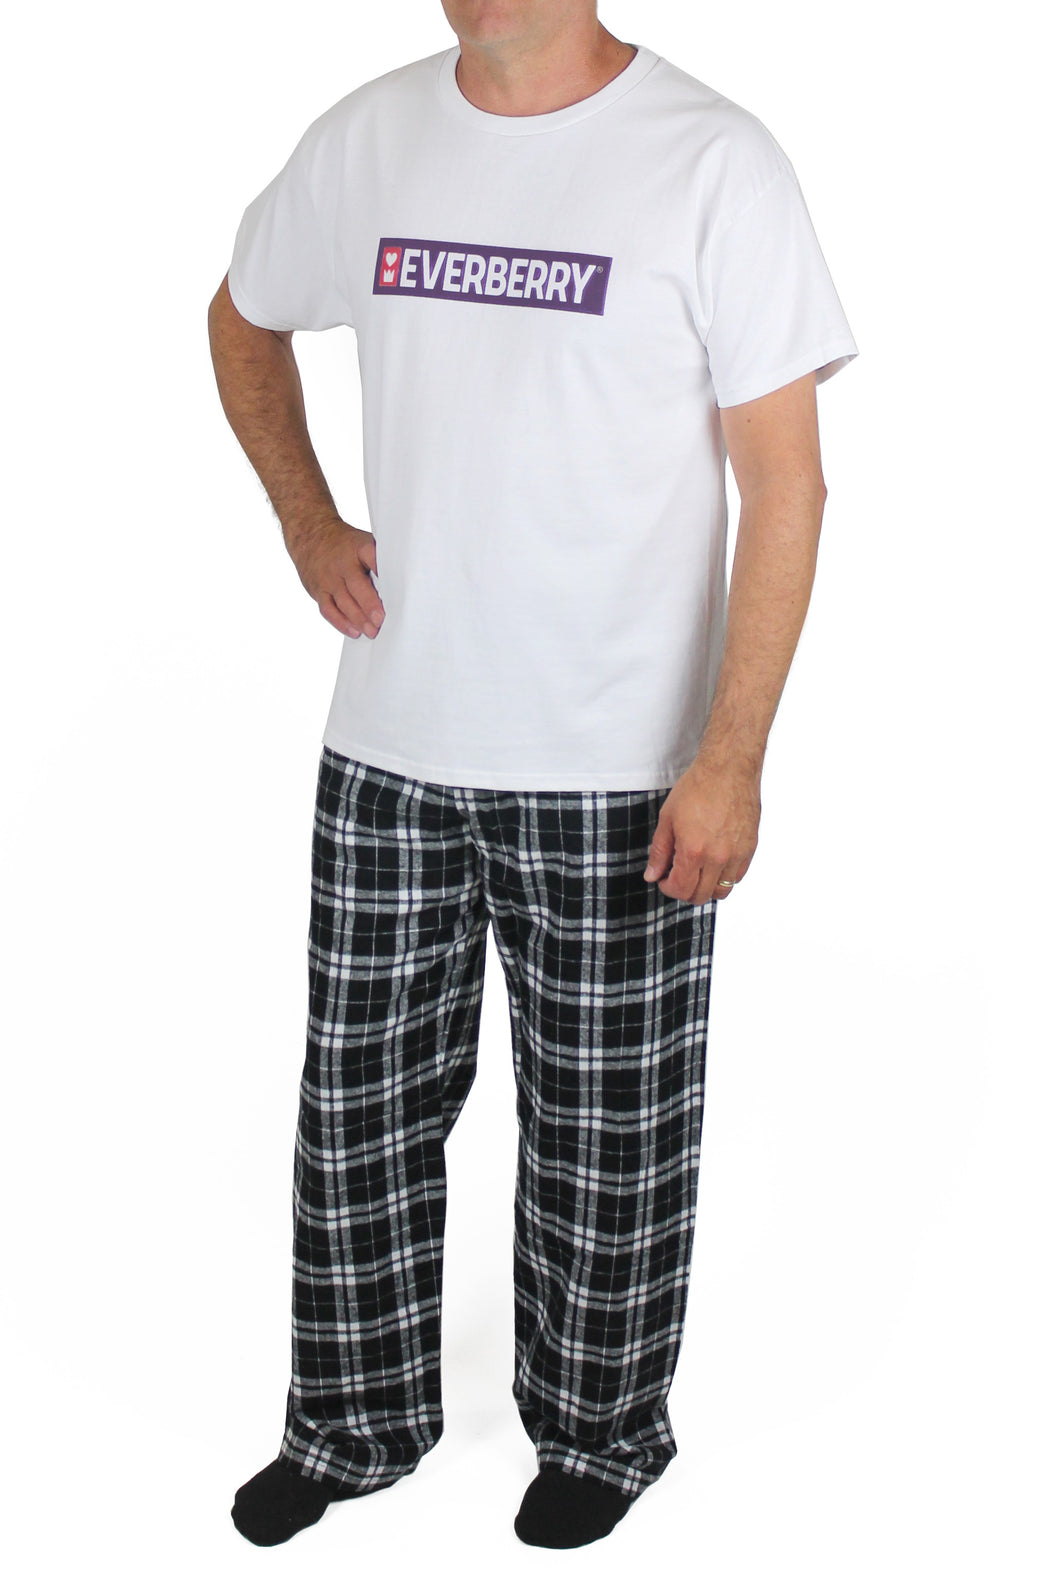 Everberry Logo Pajama set with white t-shirt and black and white plaid pants